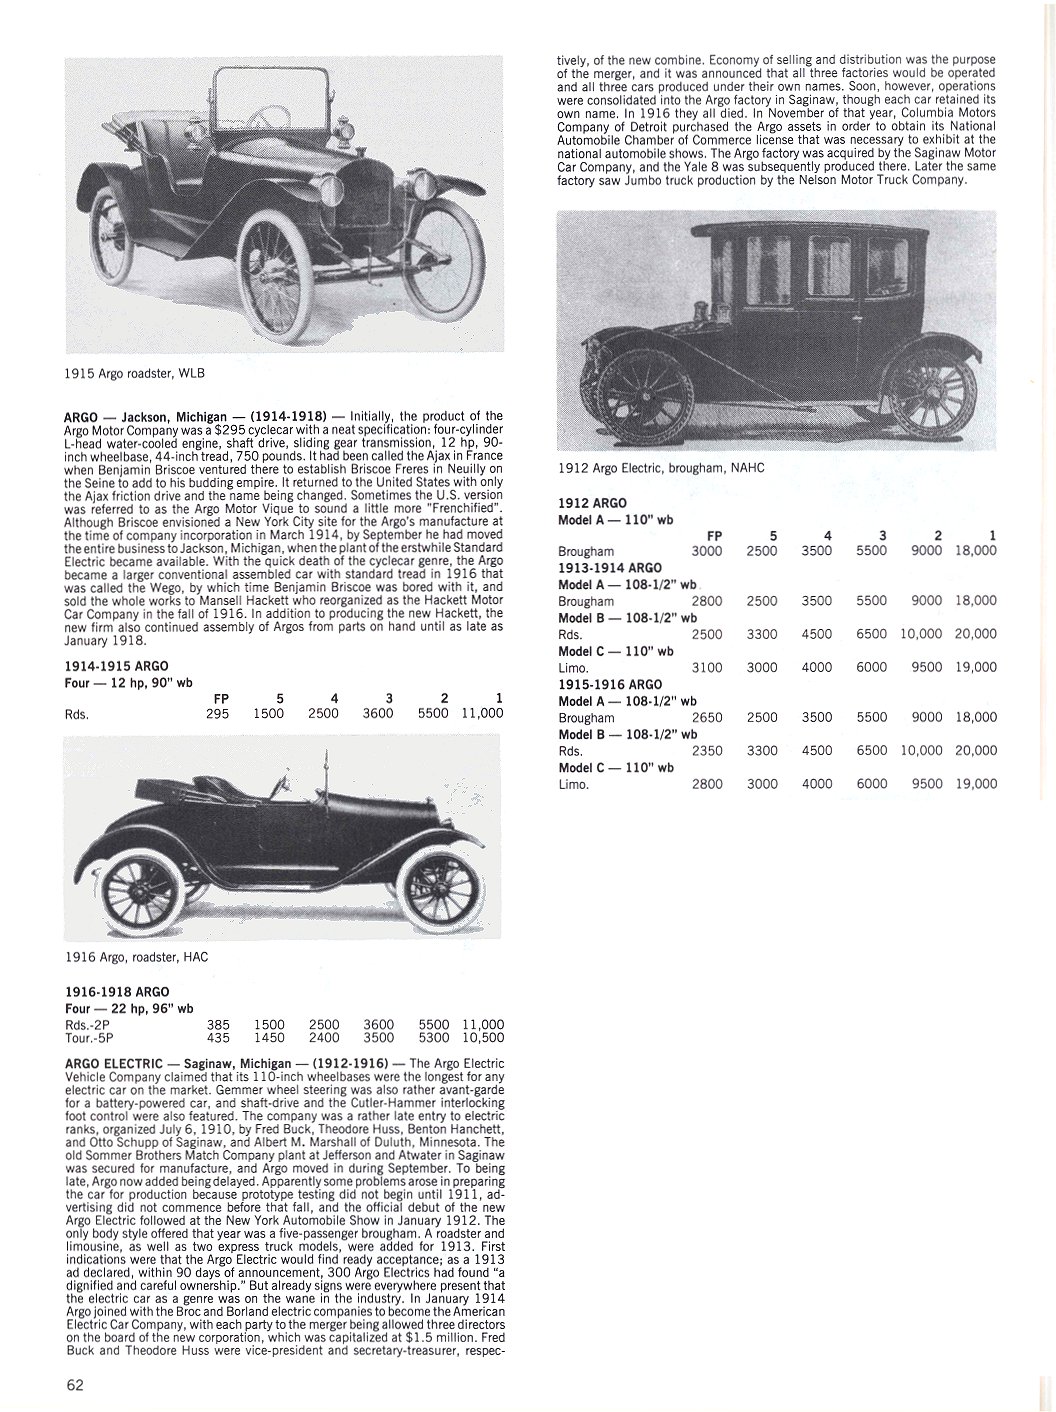 ARGO Electric Saginaw, Michigan 1912-1916 Standard Catalog of AMERICAN CARS 1805-1942 By Beverly Rae Kimes & Henry Austin Clark, Jr. Krause Publications ISBN: 0-87341-428-4 8.5″x11″ page 62